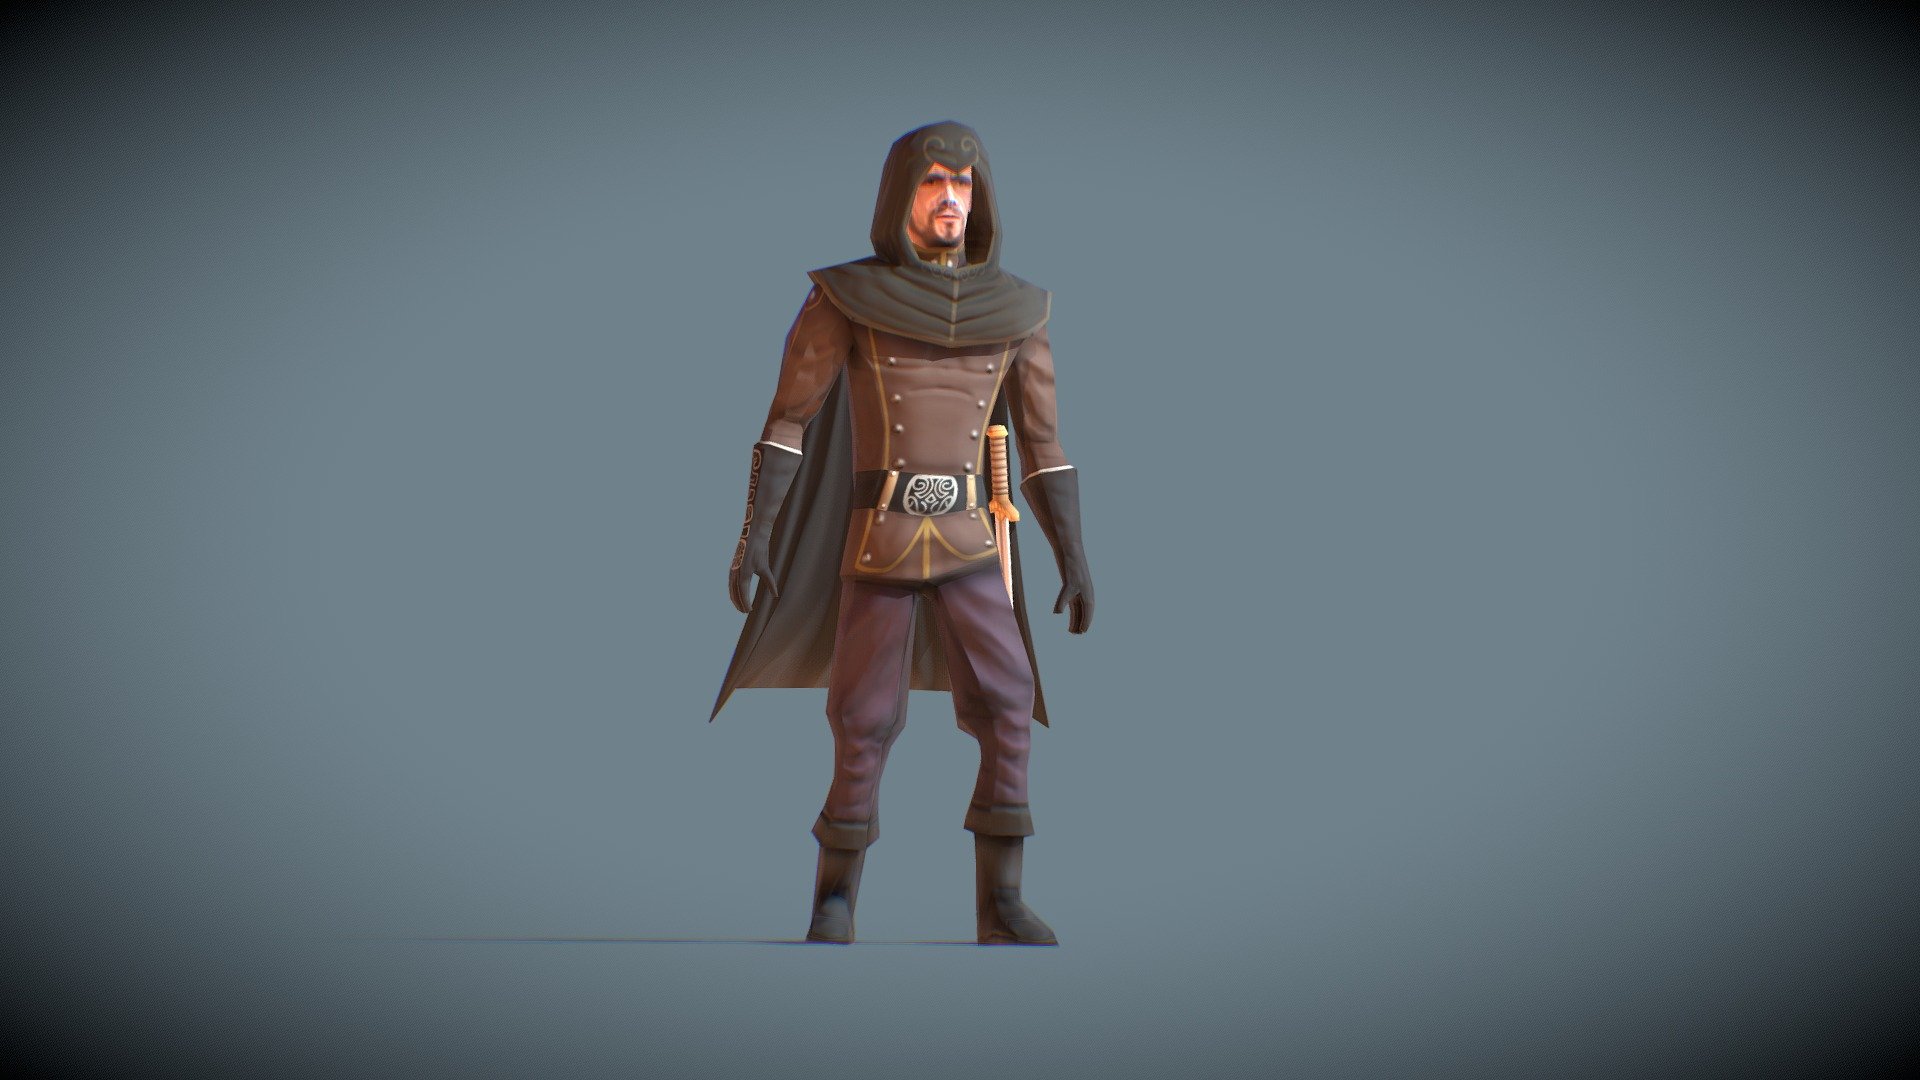 A simple low poly model, but with a great look. Ideal for mobile games capable of running efficiently on older devices. This still has the added value of having a collection of animations that can be redirected to other models.


This model does not have facial expressions.
cloak and sword are separate items from the model.
The hood can be removed using blendshapes/shapekeys/morph targets .(available in the model)
Includes free animations that can be retargeted to other models.

Animations

basic animations: idle, walk, run, jump, kick, hurt, die.
object interactive: pushing idle, pushing, pushing stuck, pull, climb over (obstacle), hanging (ledge), climb over (ledge)
combat actions: take sword, draw sword, sword attack, sword attack 2, idle sword.
setup animations: T Pose (used for retargeting), Standard (character rest position)

With an original design created by ManNeko, this character is freely inspired by warriors of the middle ages 3d model